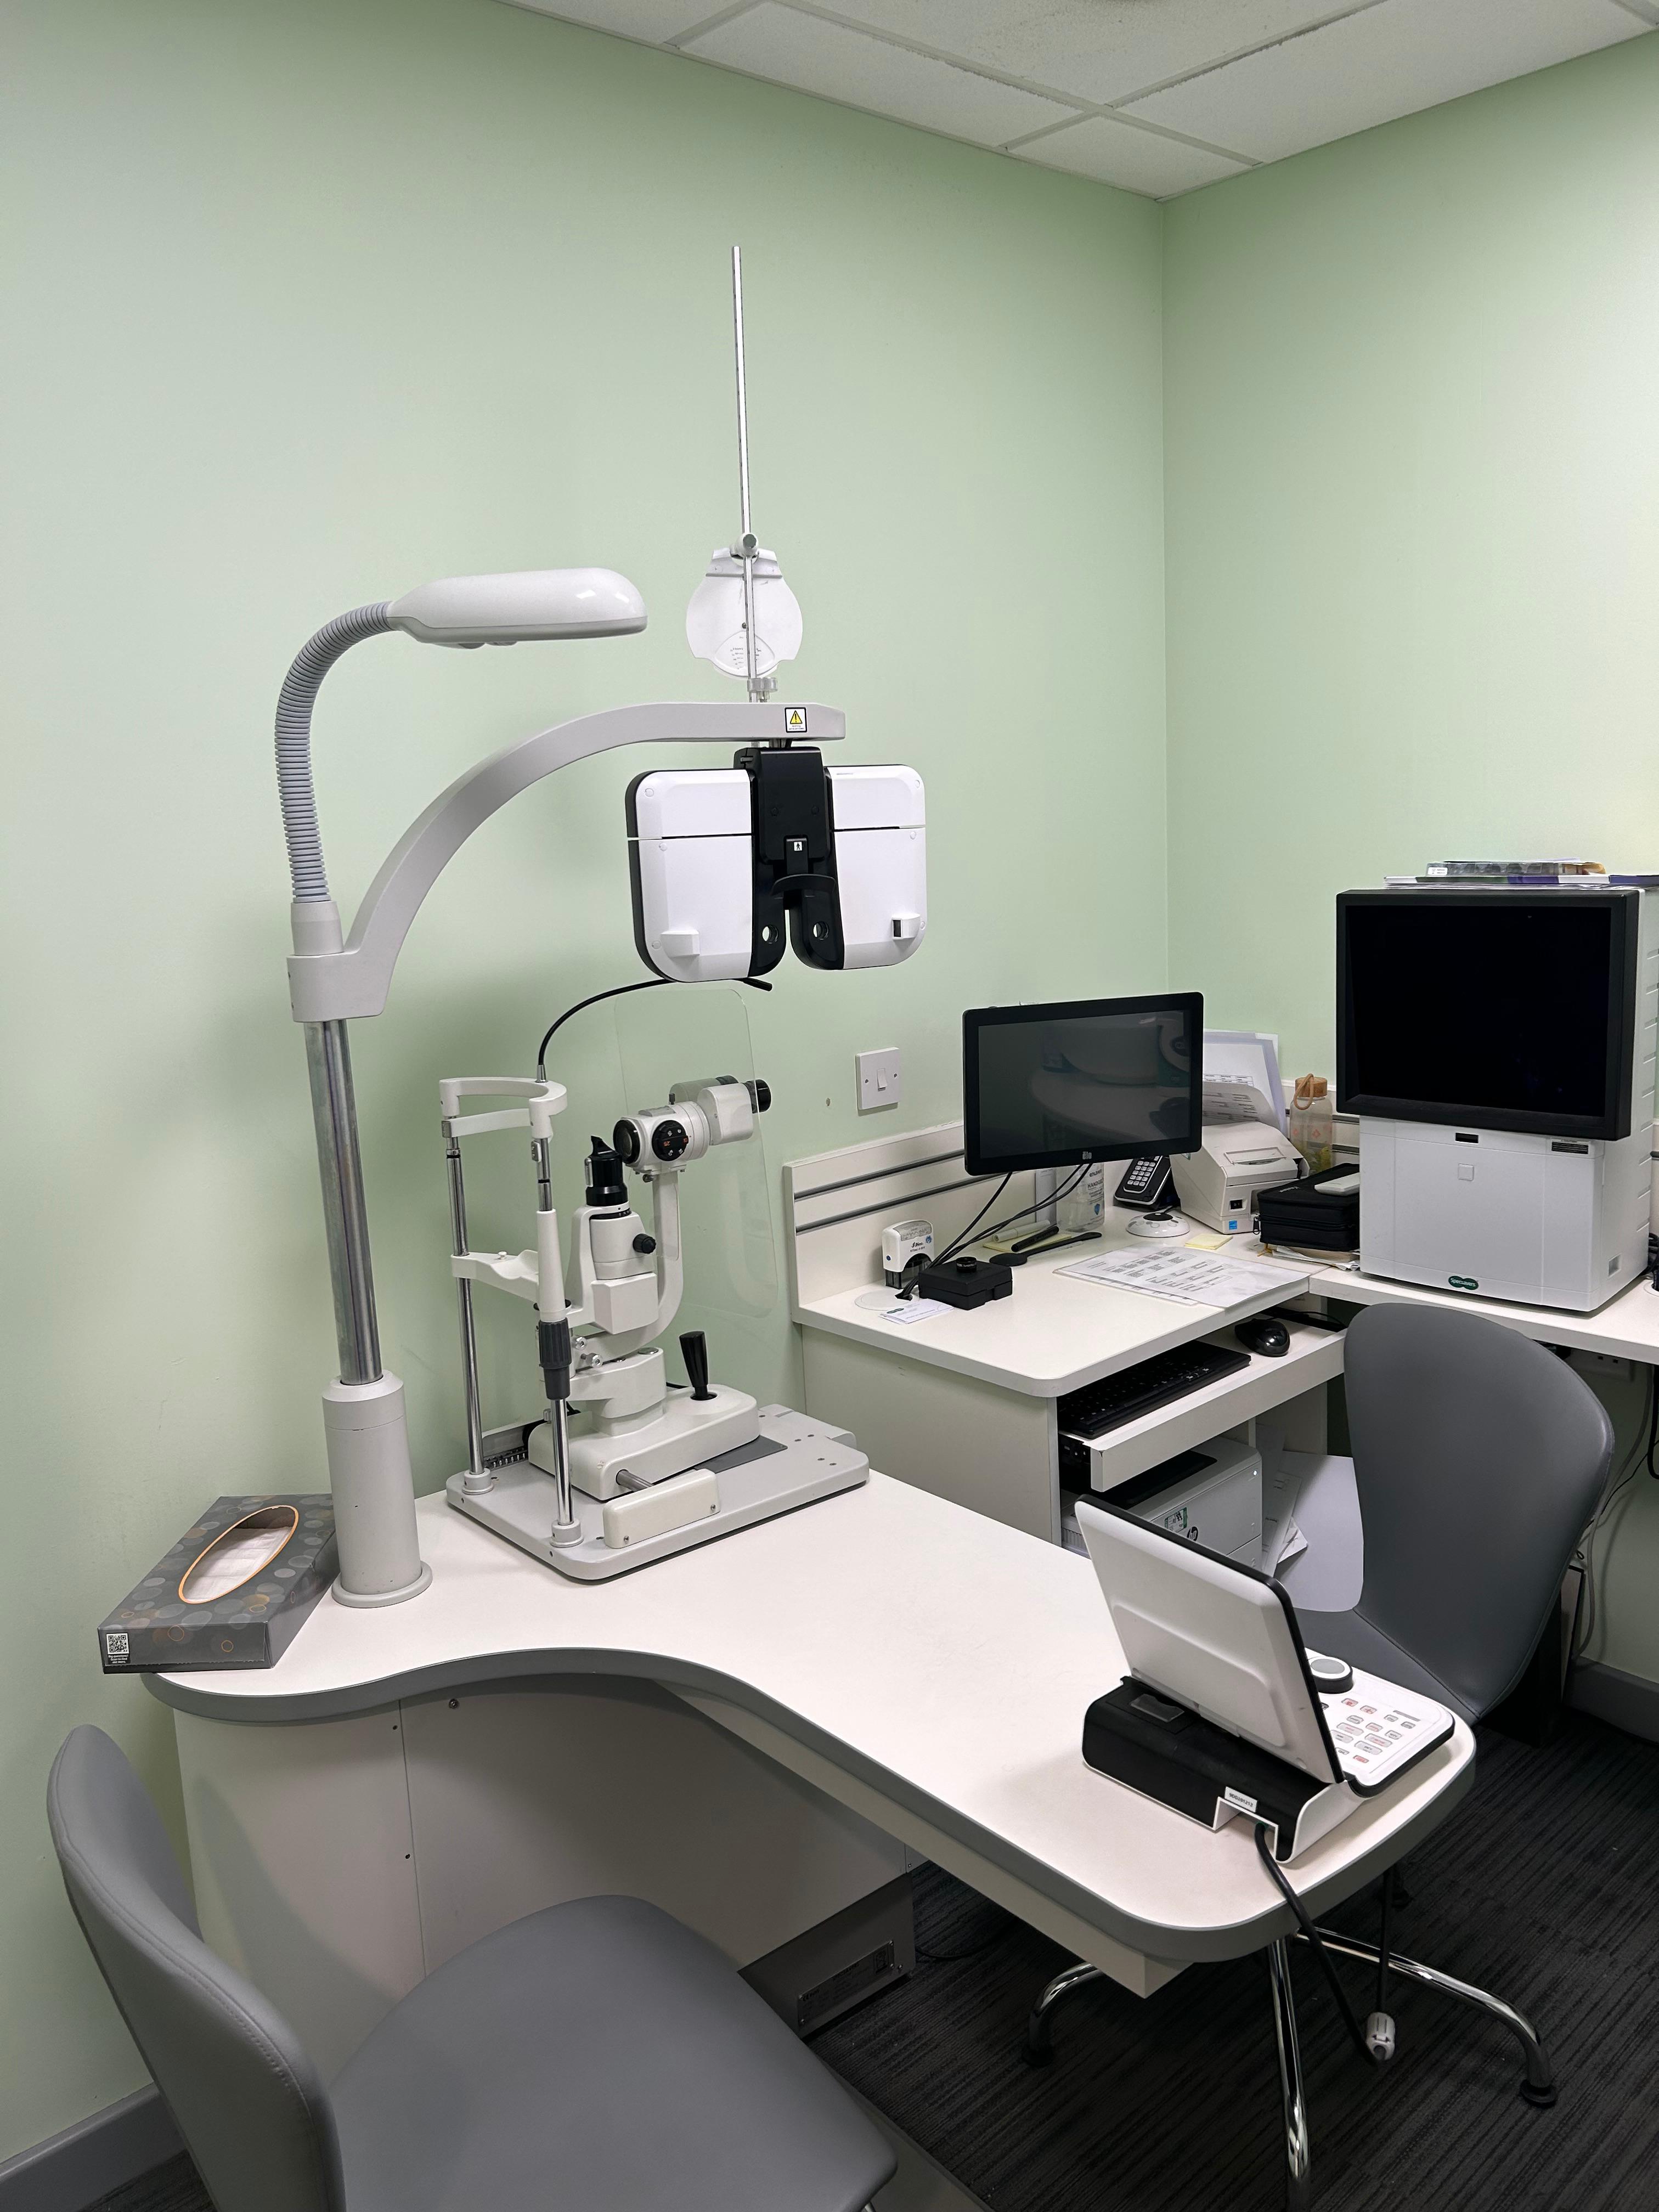 Images Specsavers Opticians and Audiologists - Greenock